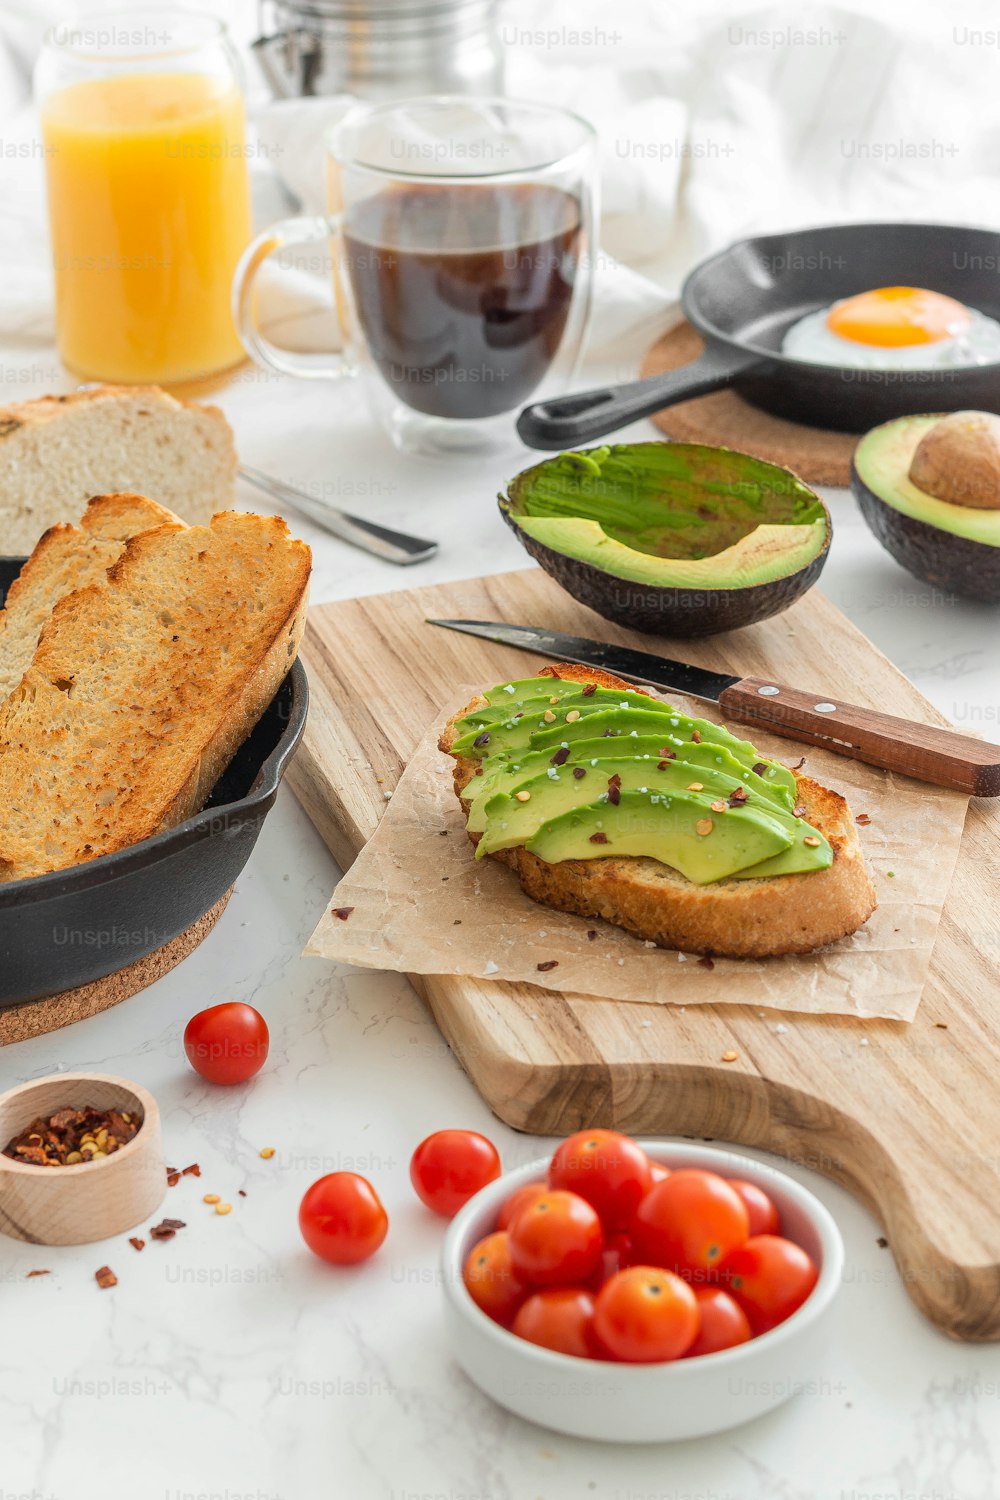 a table topped with bread, tomatoes, avocado and other foods